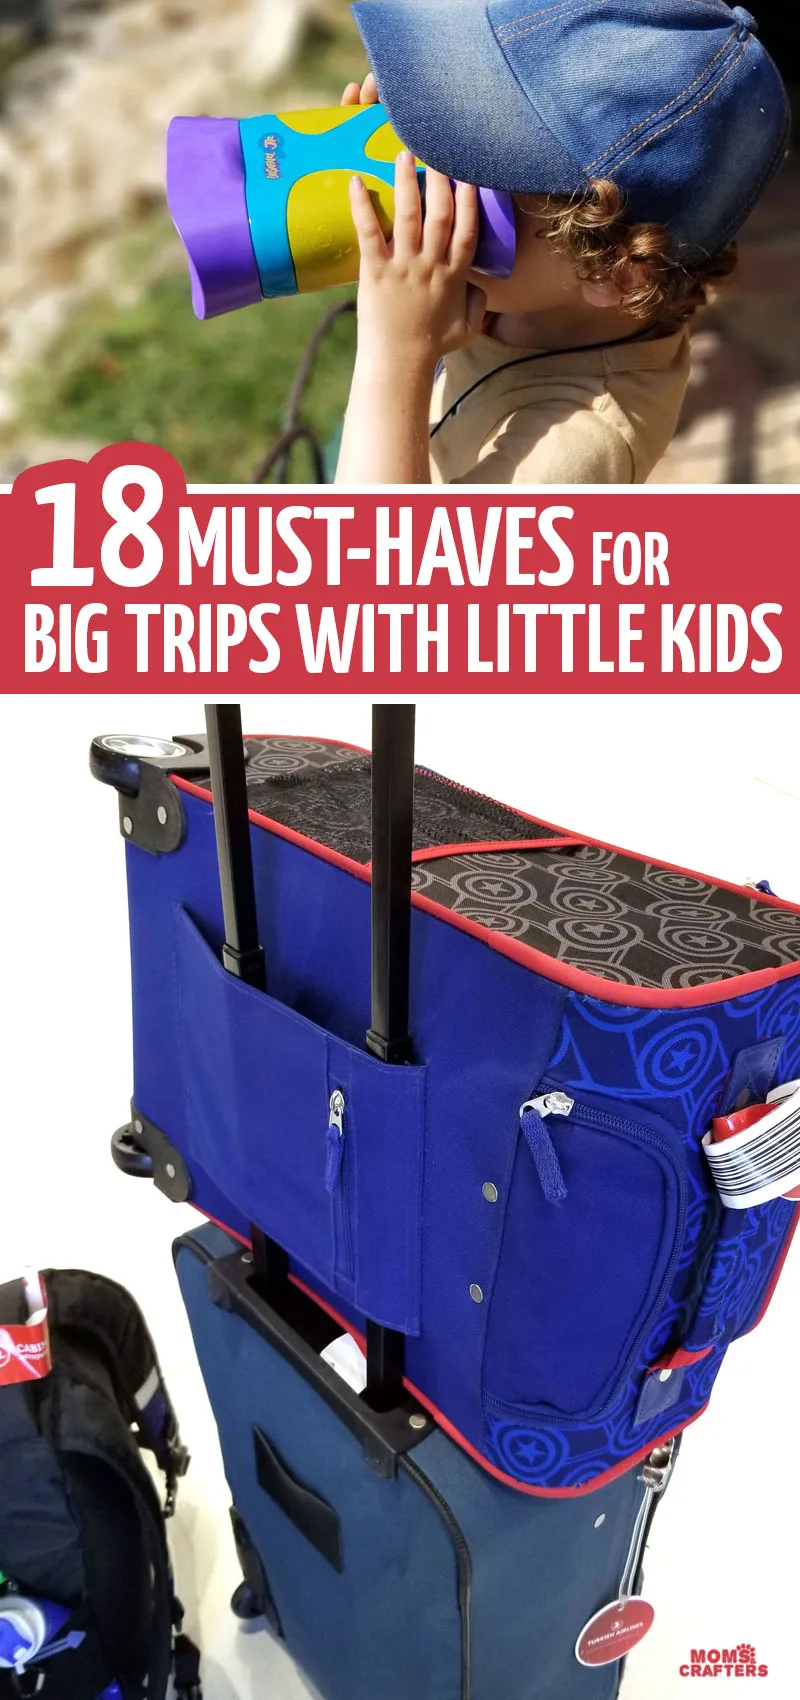 18 must haves for international travel with kids plus tips for traveling with toddlers preschoolers and big kids. This must-have travel gear will help your long haul flight go more smoothly.